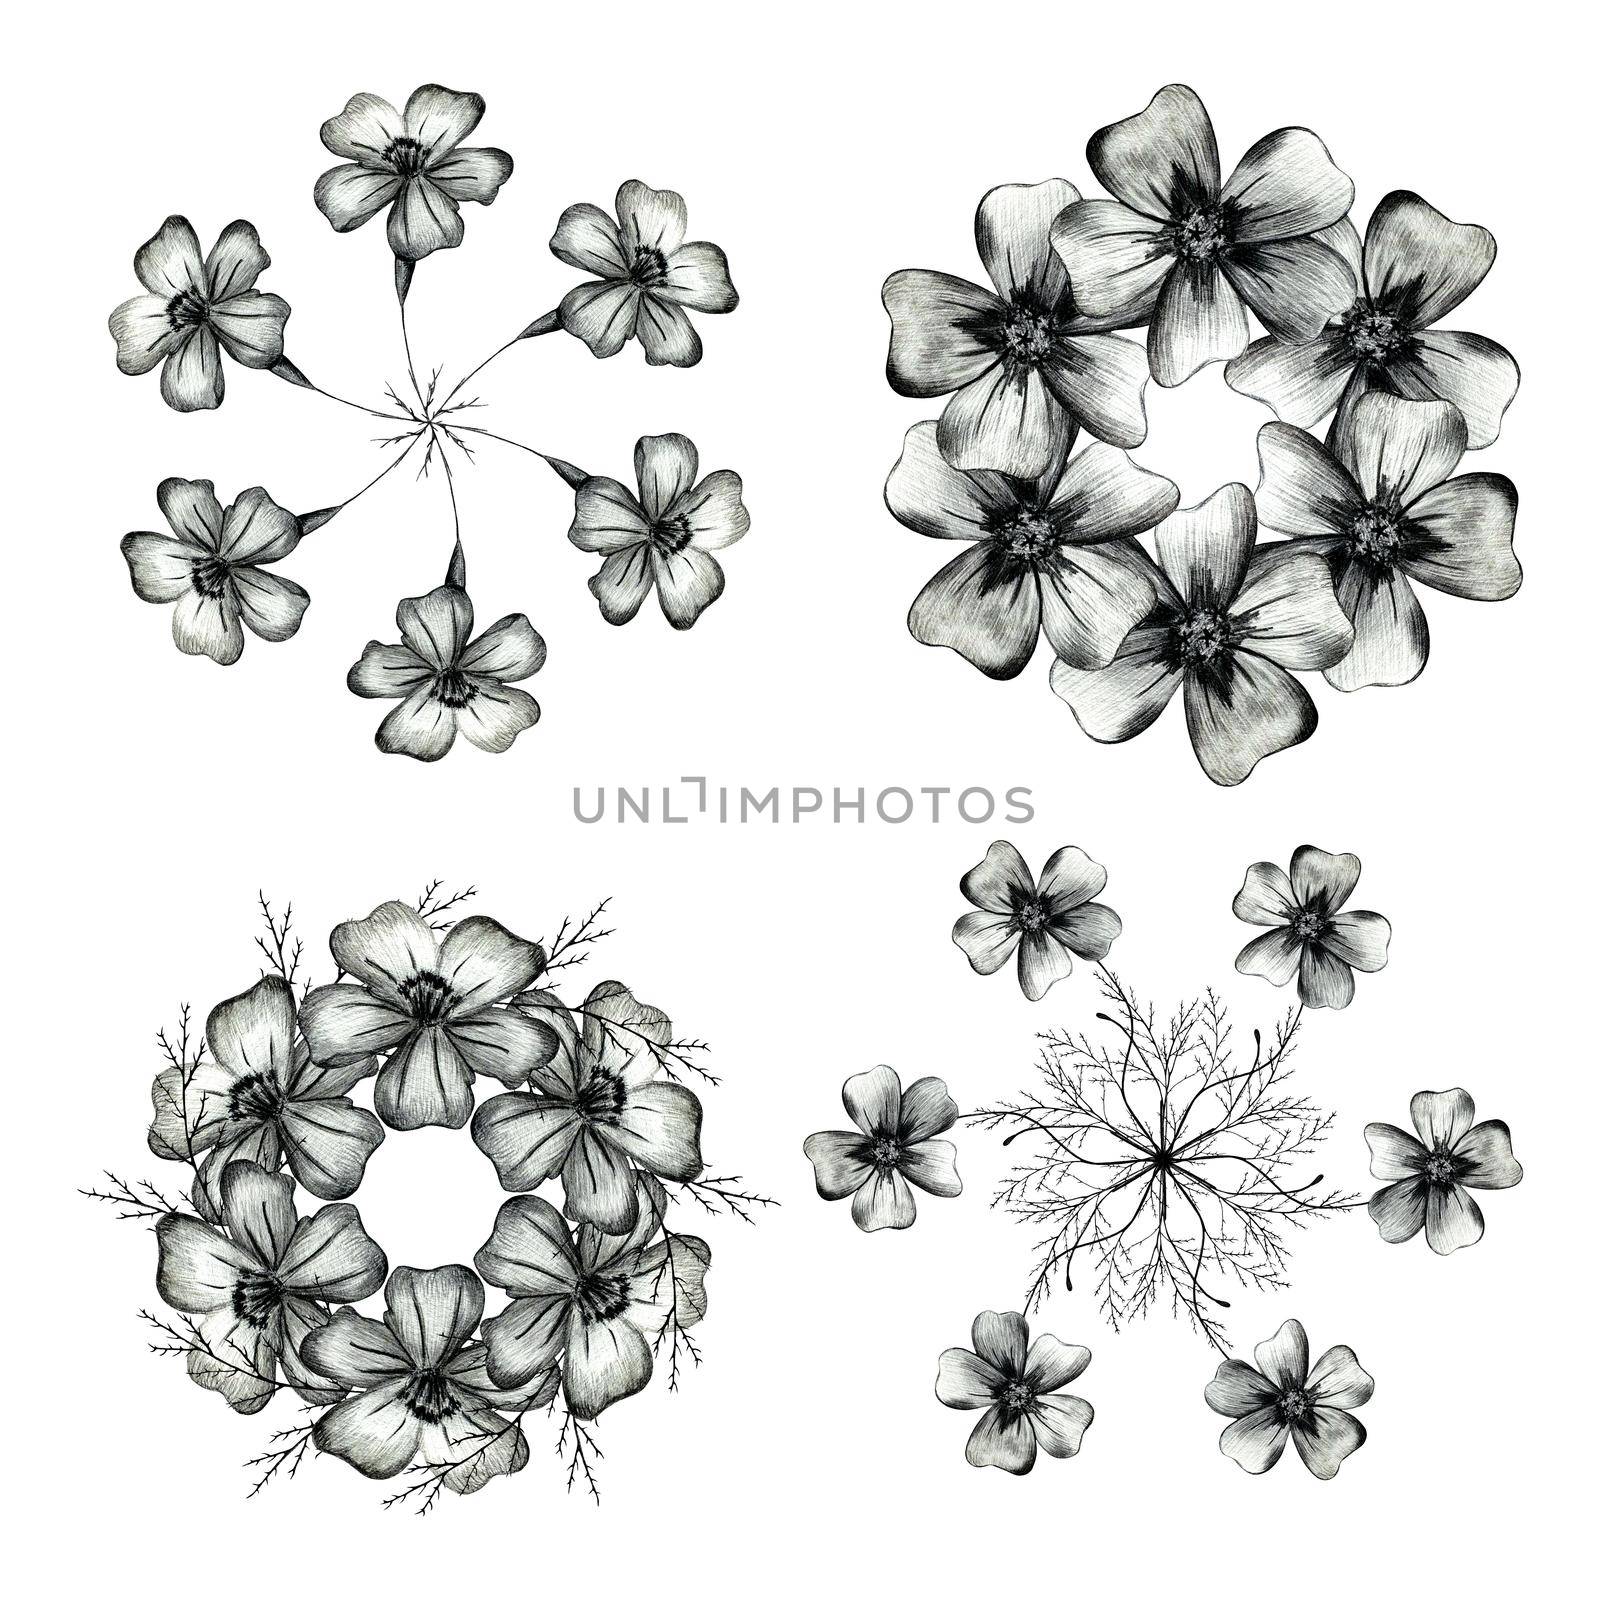 Set of Black and White Hand Drawn Marigold Flower Round Composition Isolated on White Background. Marigold Flower Composition Drawn by Black Pencil.